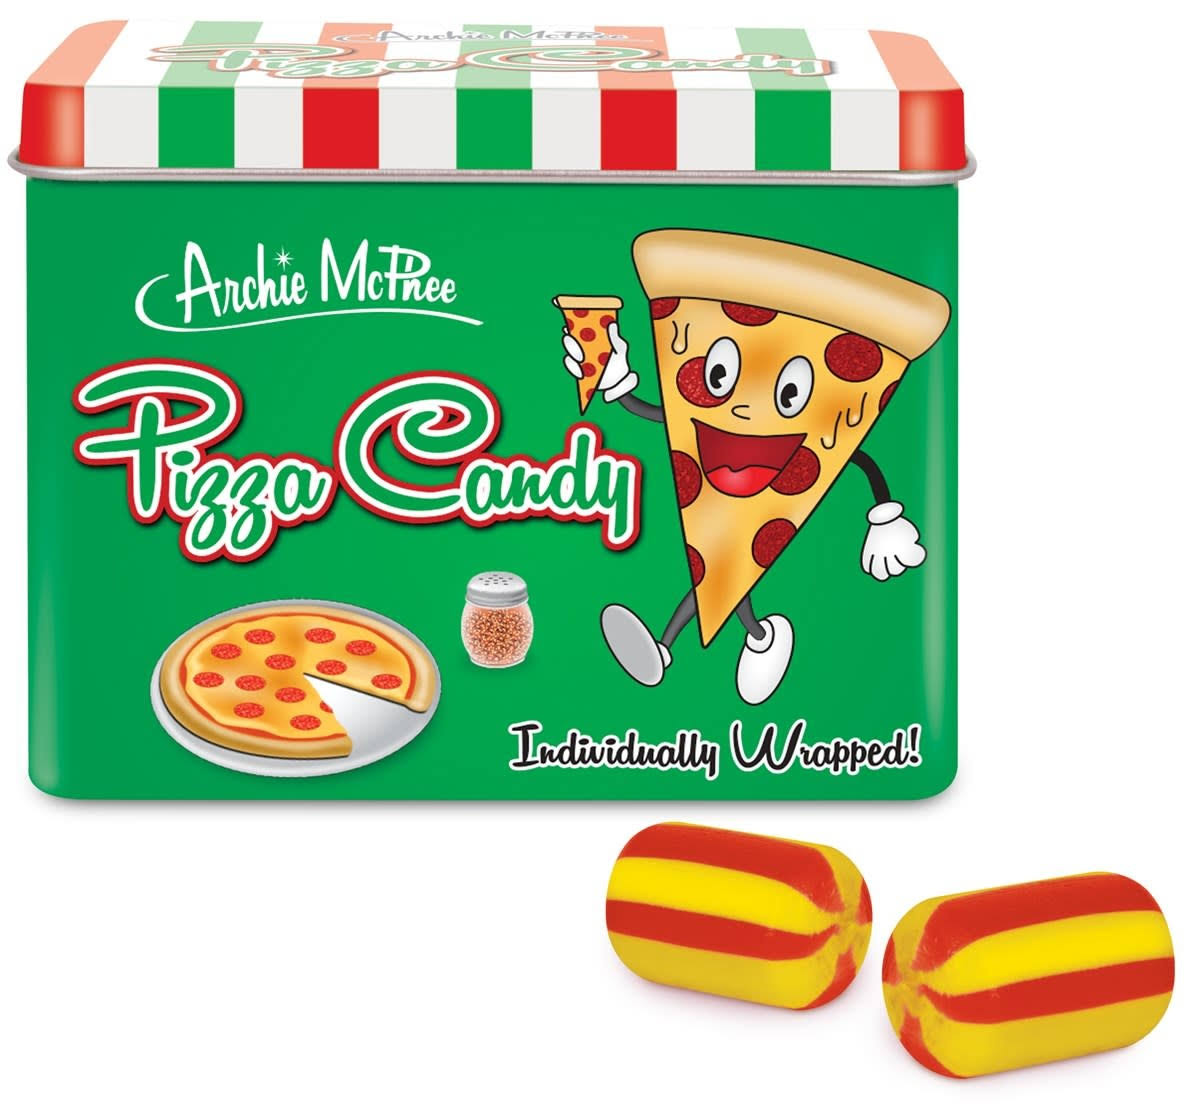 Archie McPhee Candy - Pizza